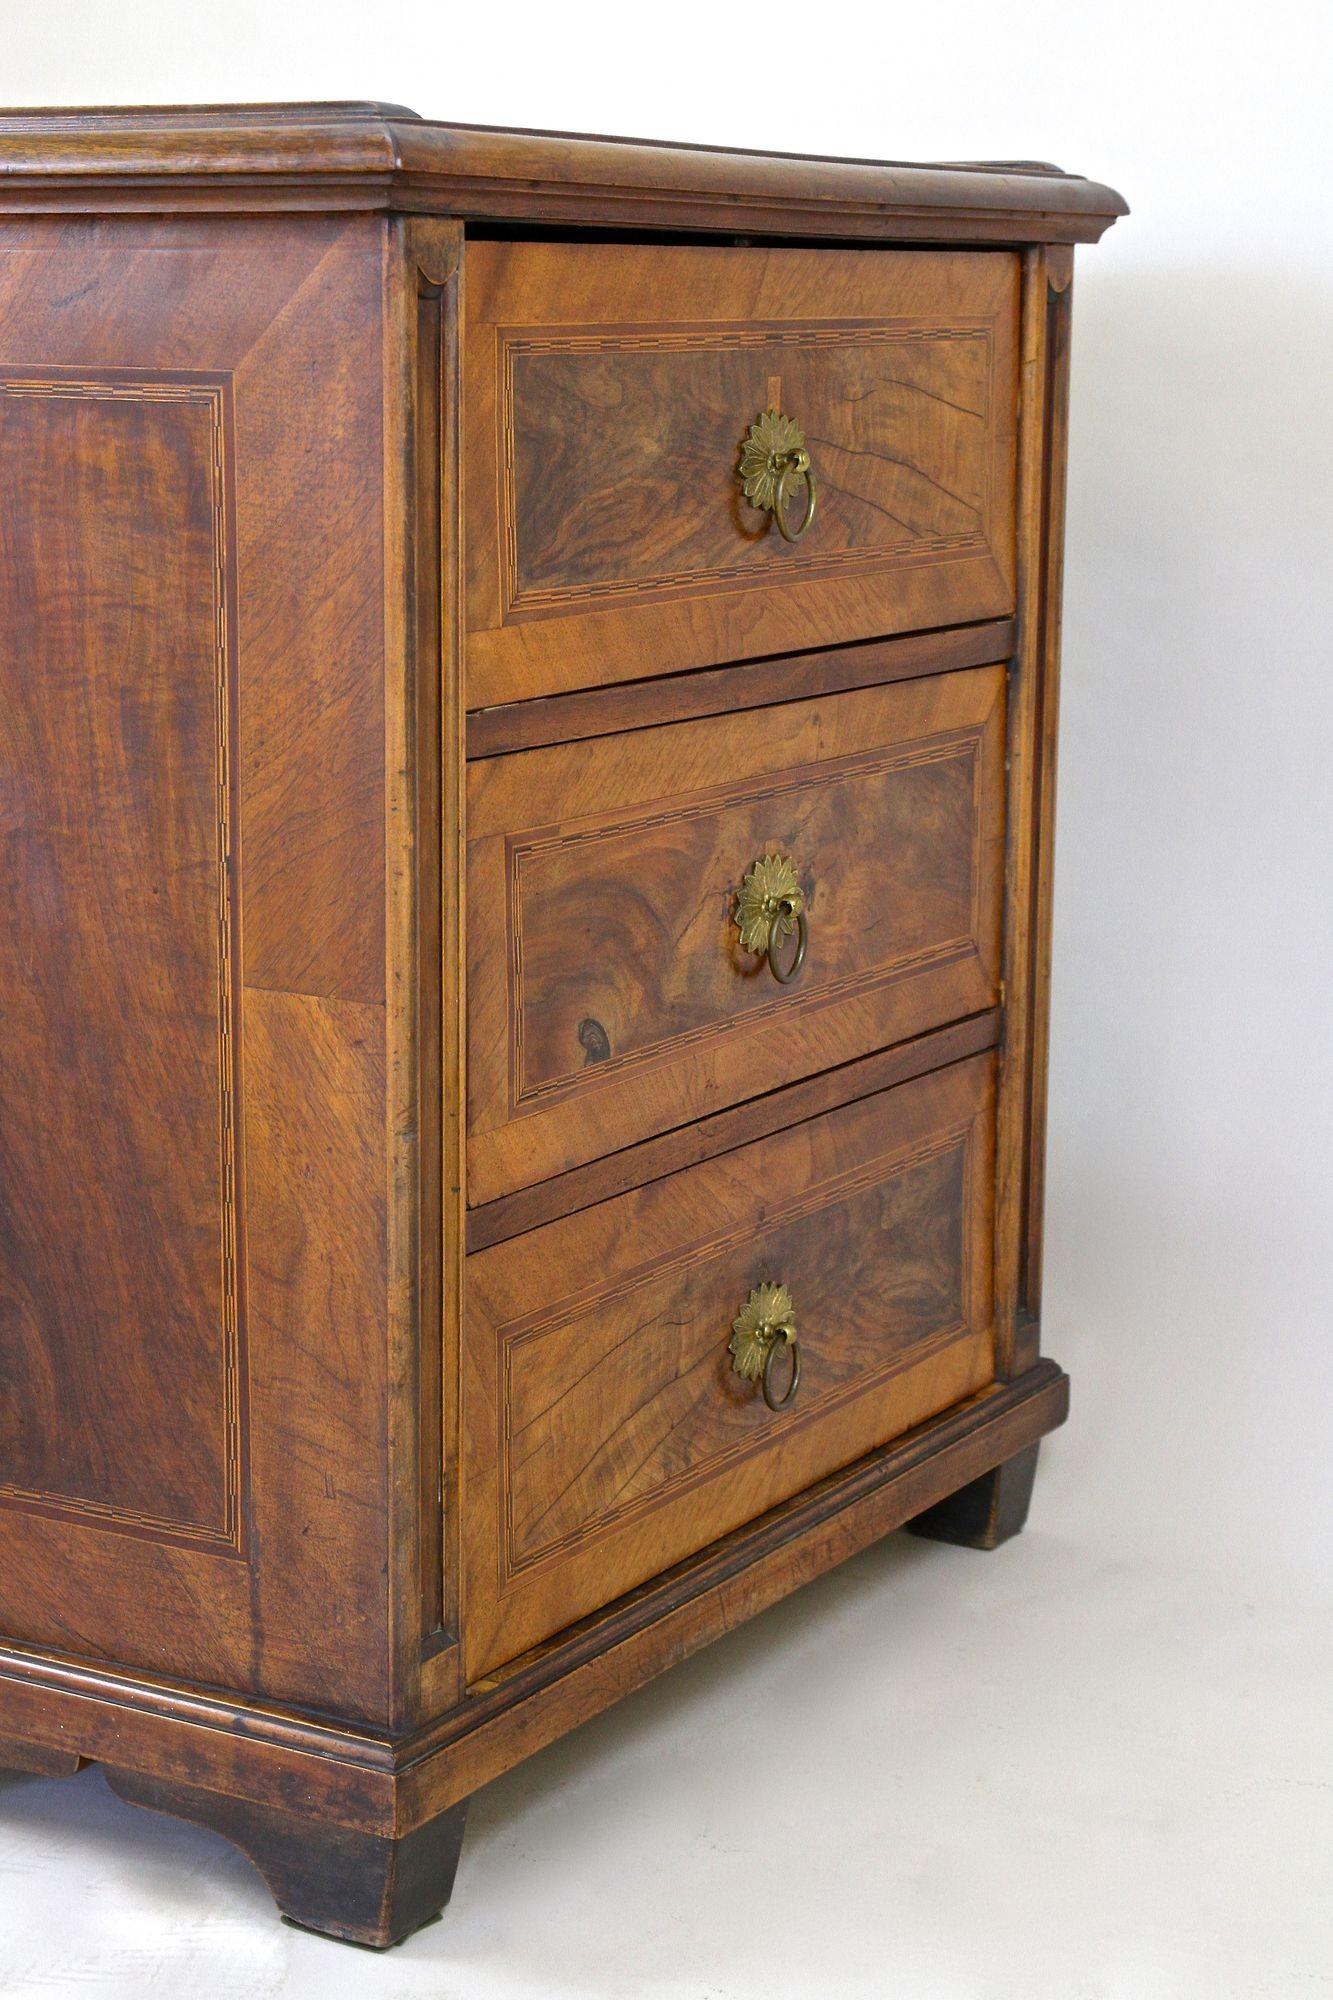 19th Century Biedermeier Nutwood Chest Of Drawers With Micro-Inlays, AT ca. 1850 For Sale 13